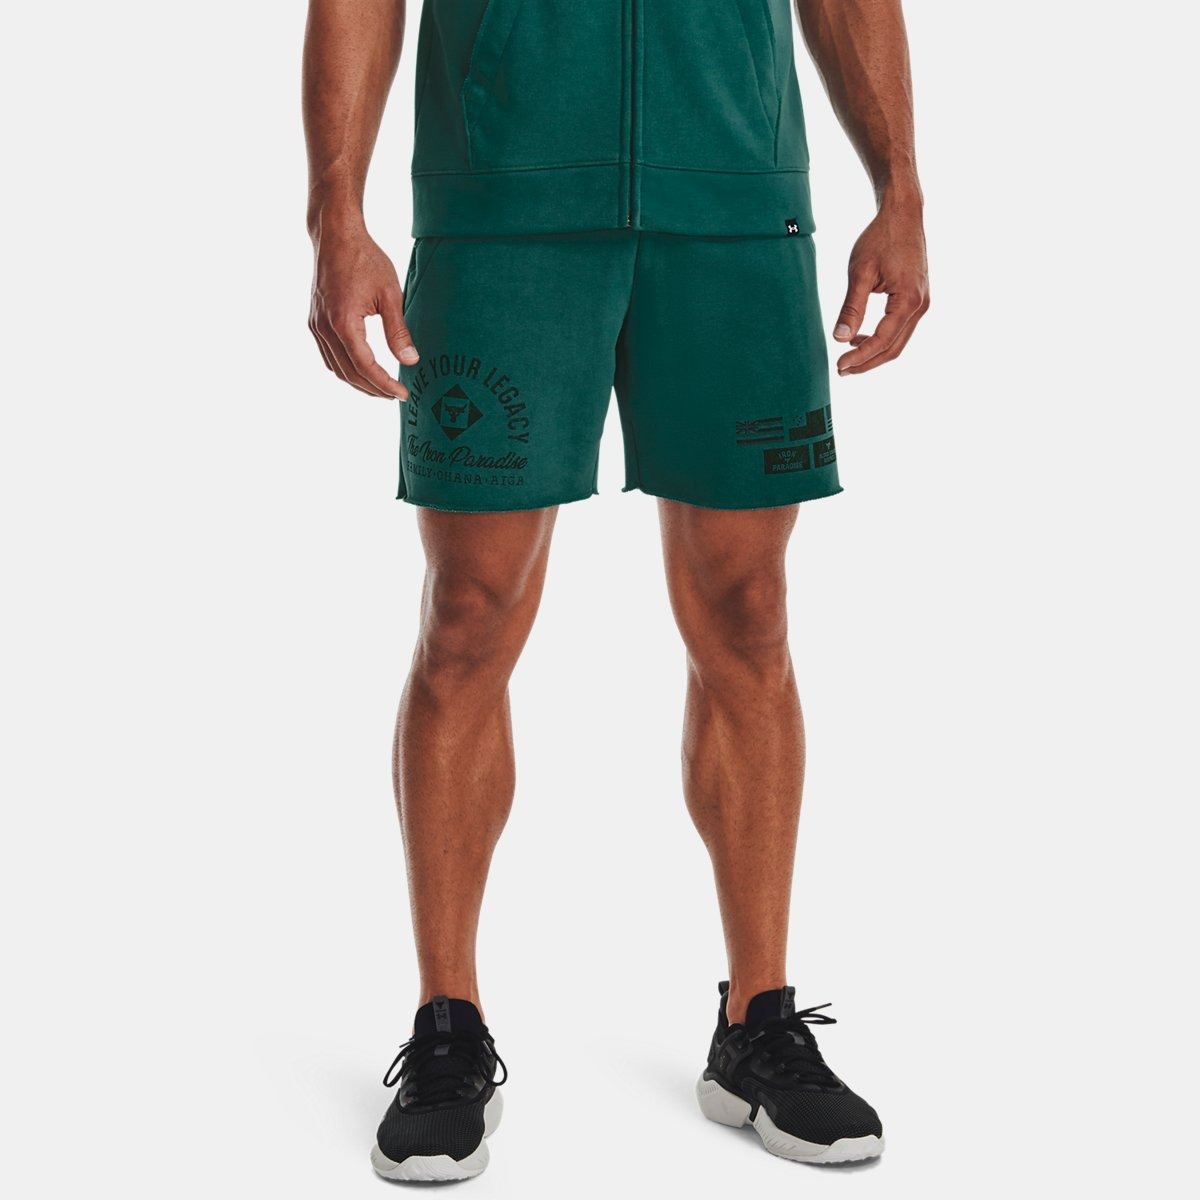 Green Shorts for Men at Under Armour GOOFASH